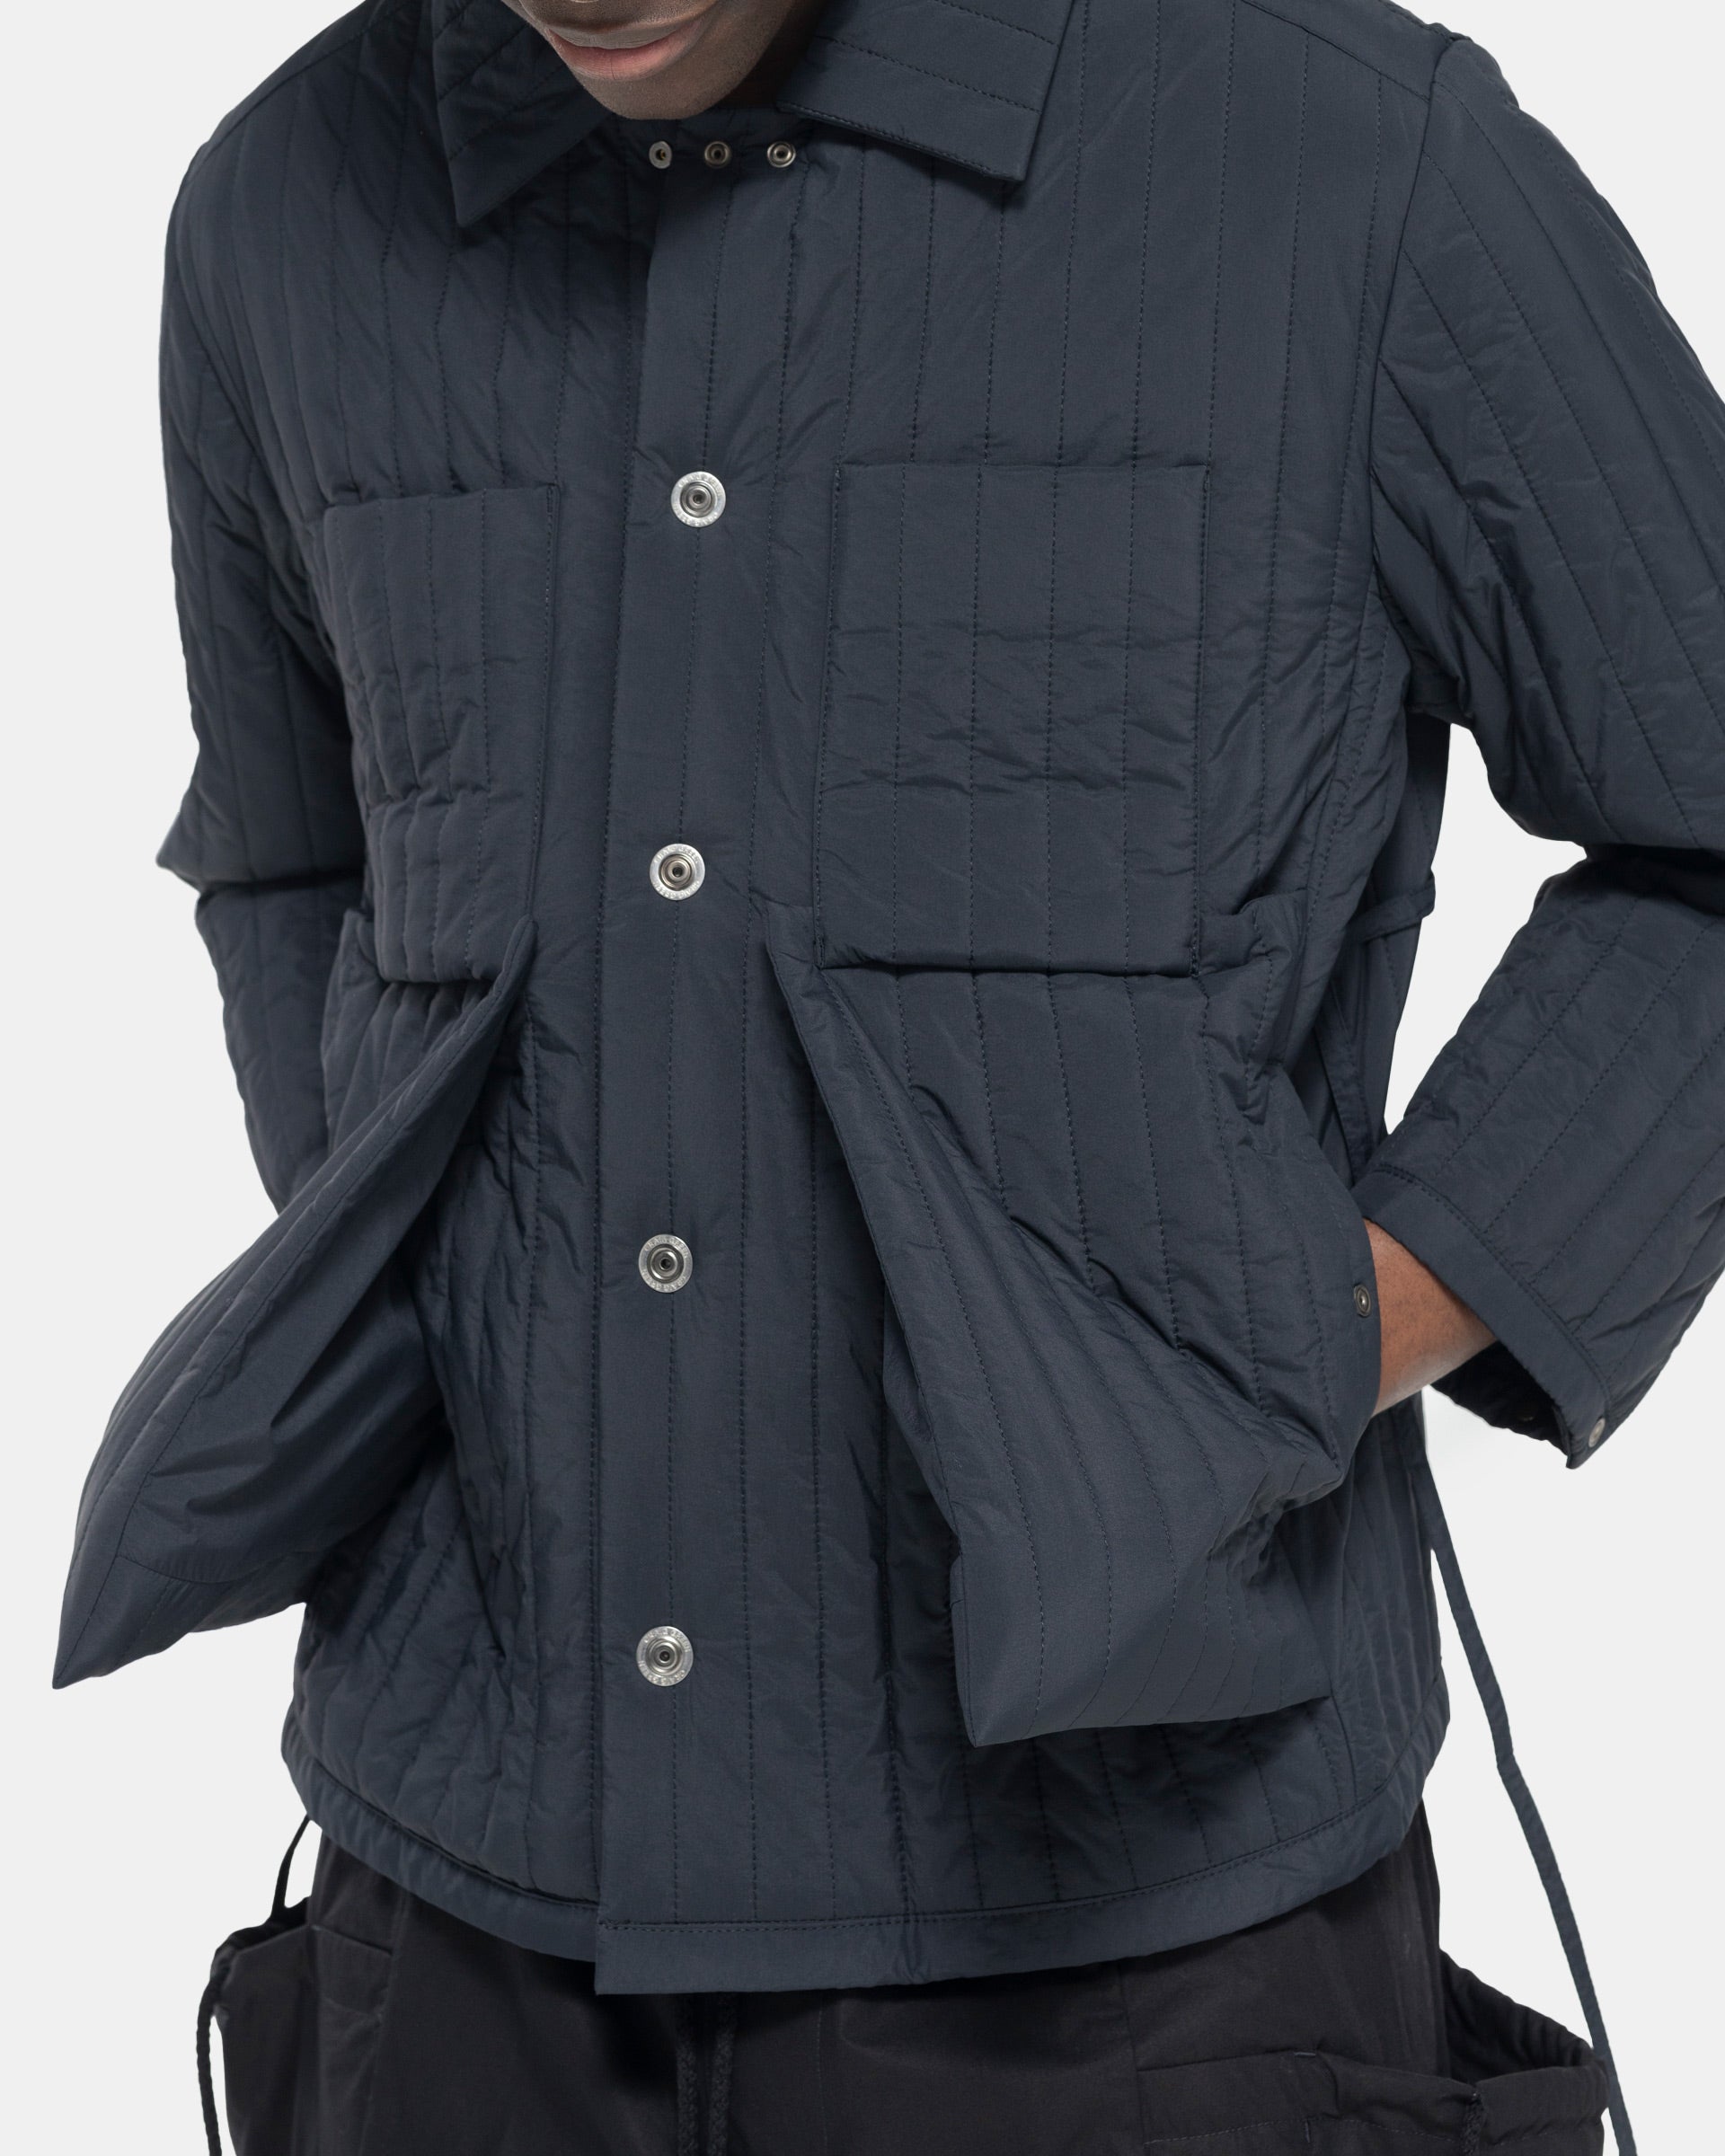 Model wearing Craig Green Quilted Worker Jacket in Black on white background